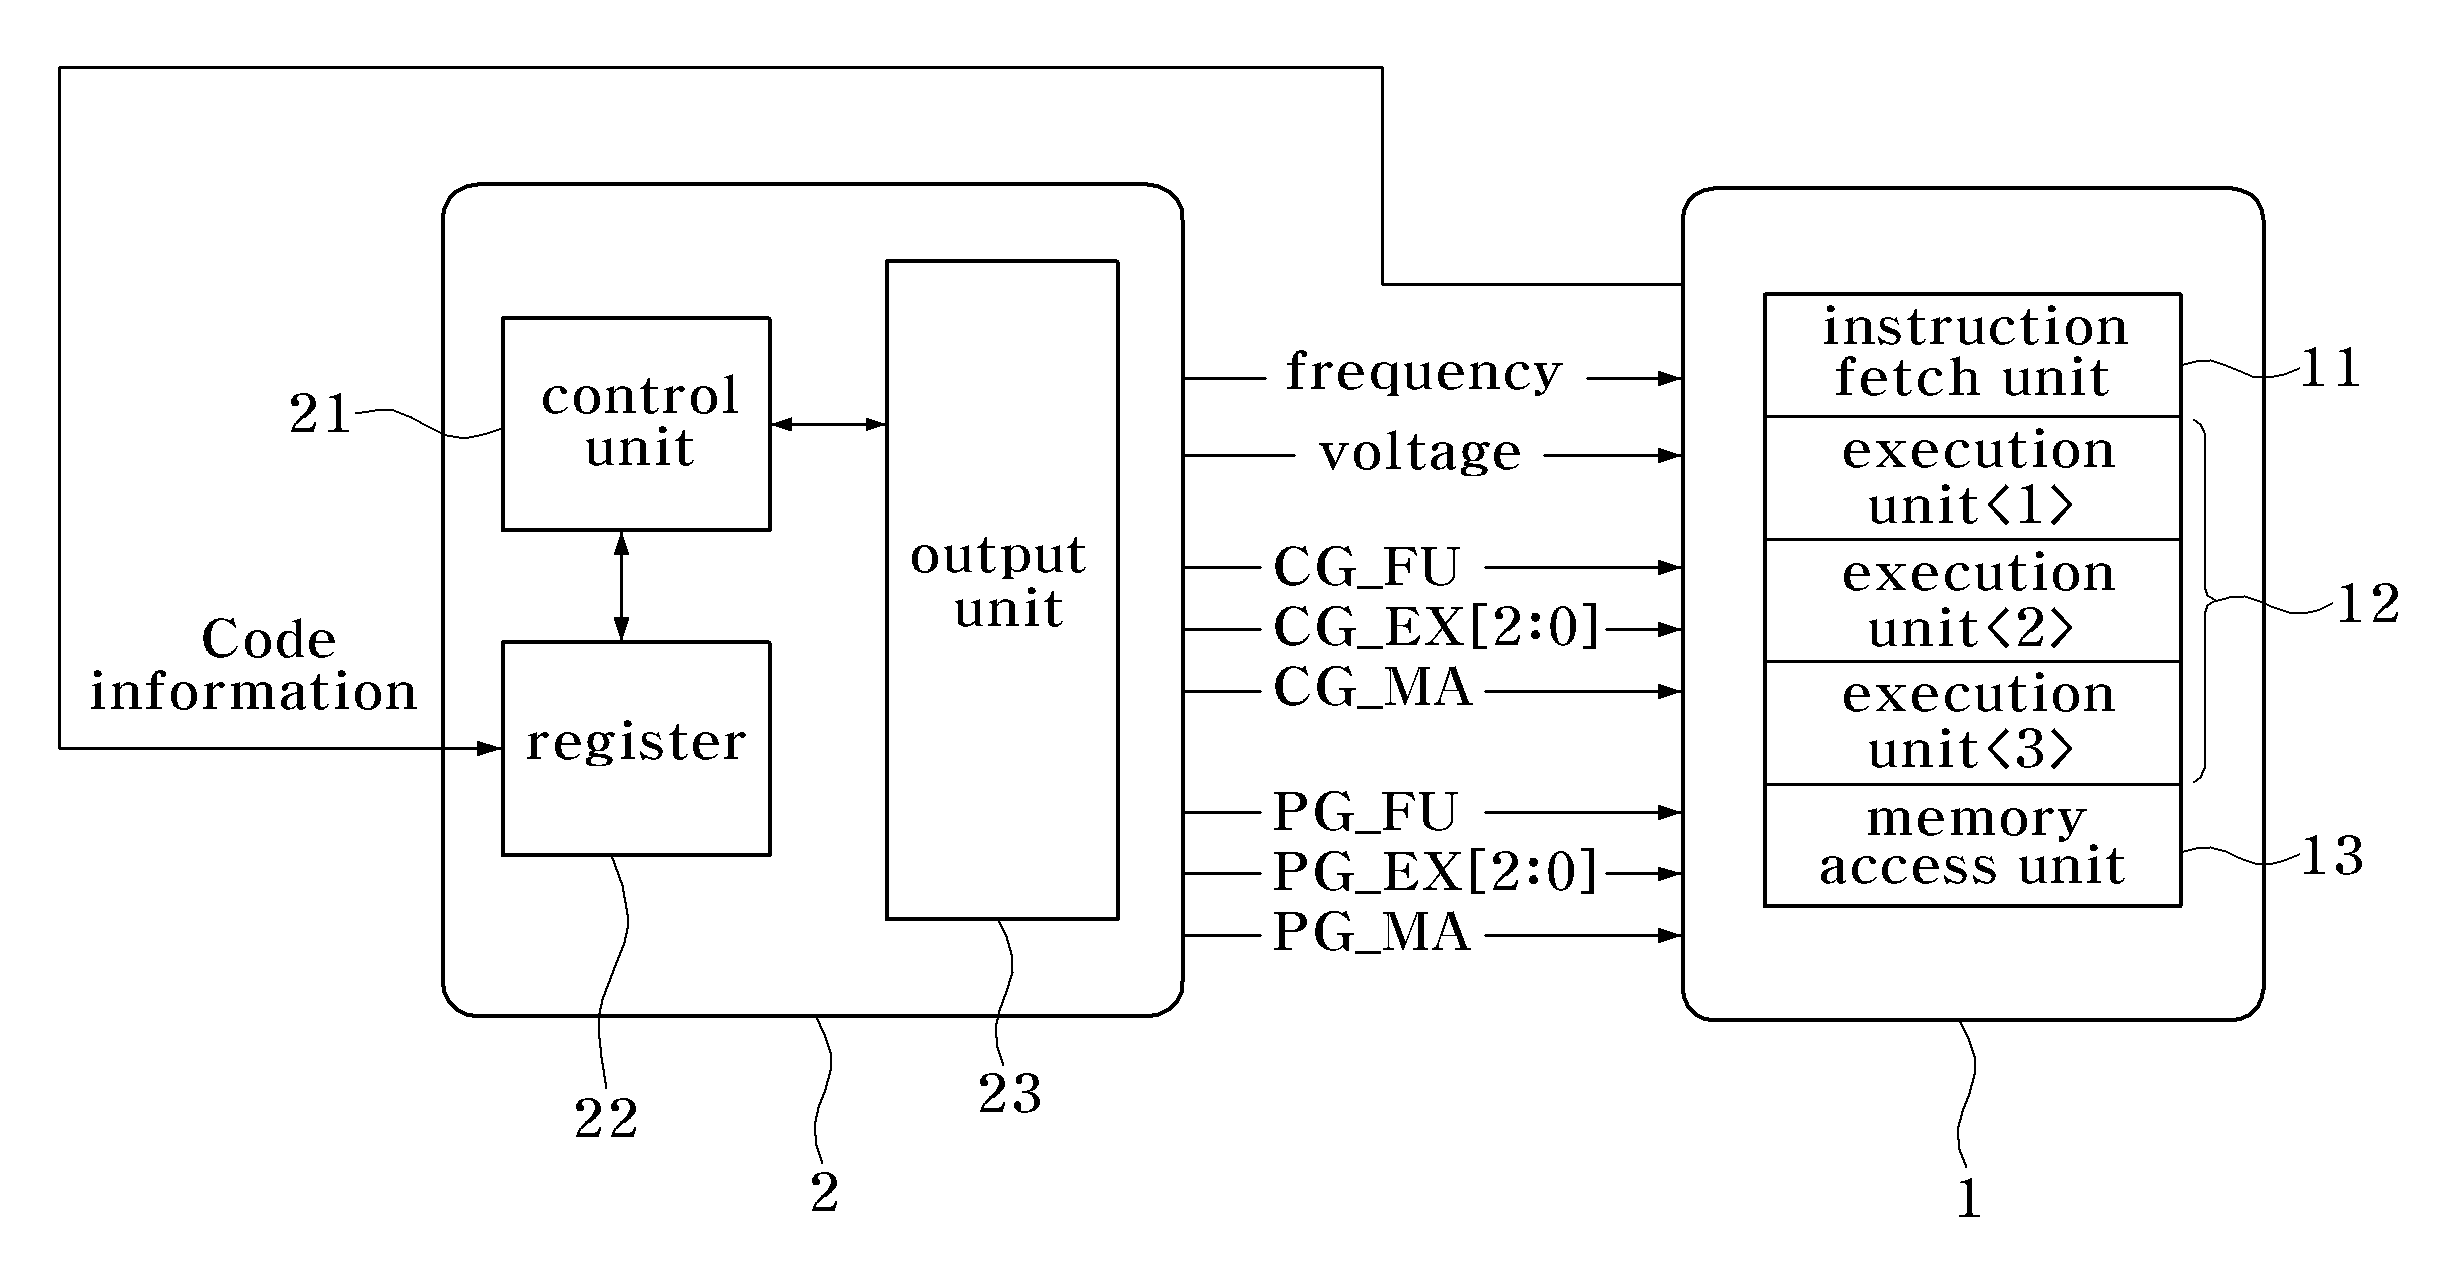 Apparatus and method for controlling power related parameters by core unit according to detailed status information of the core and application for executing